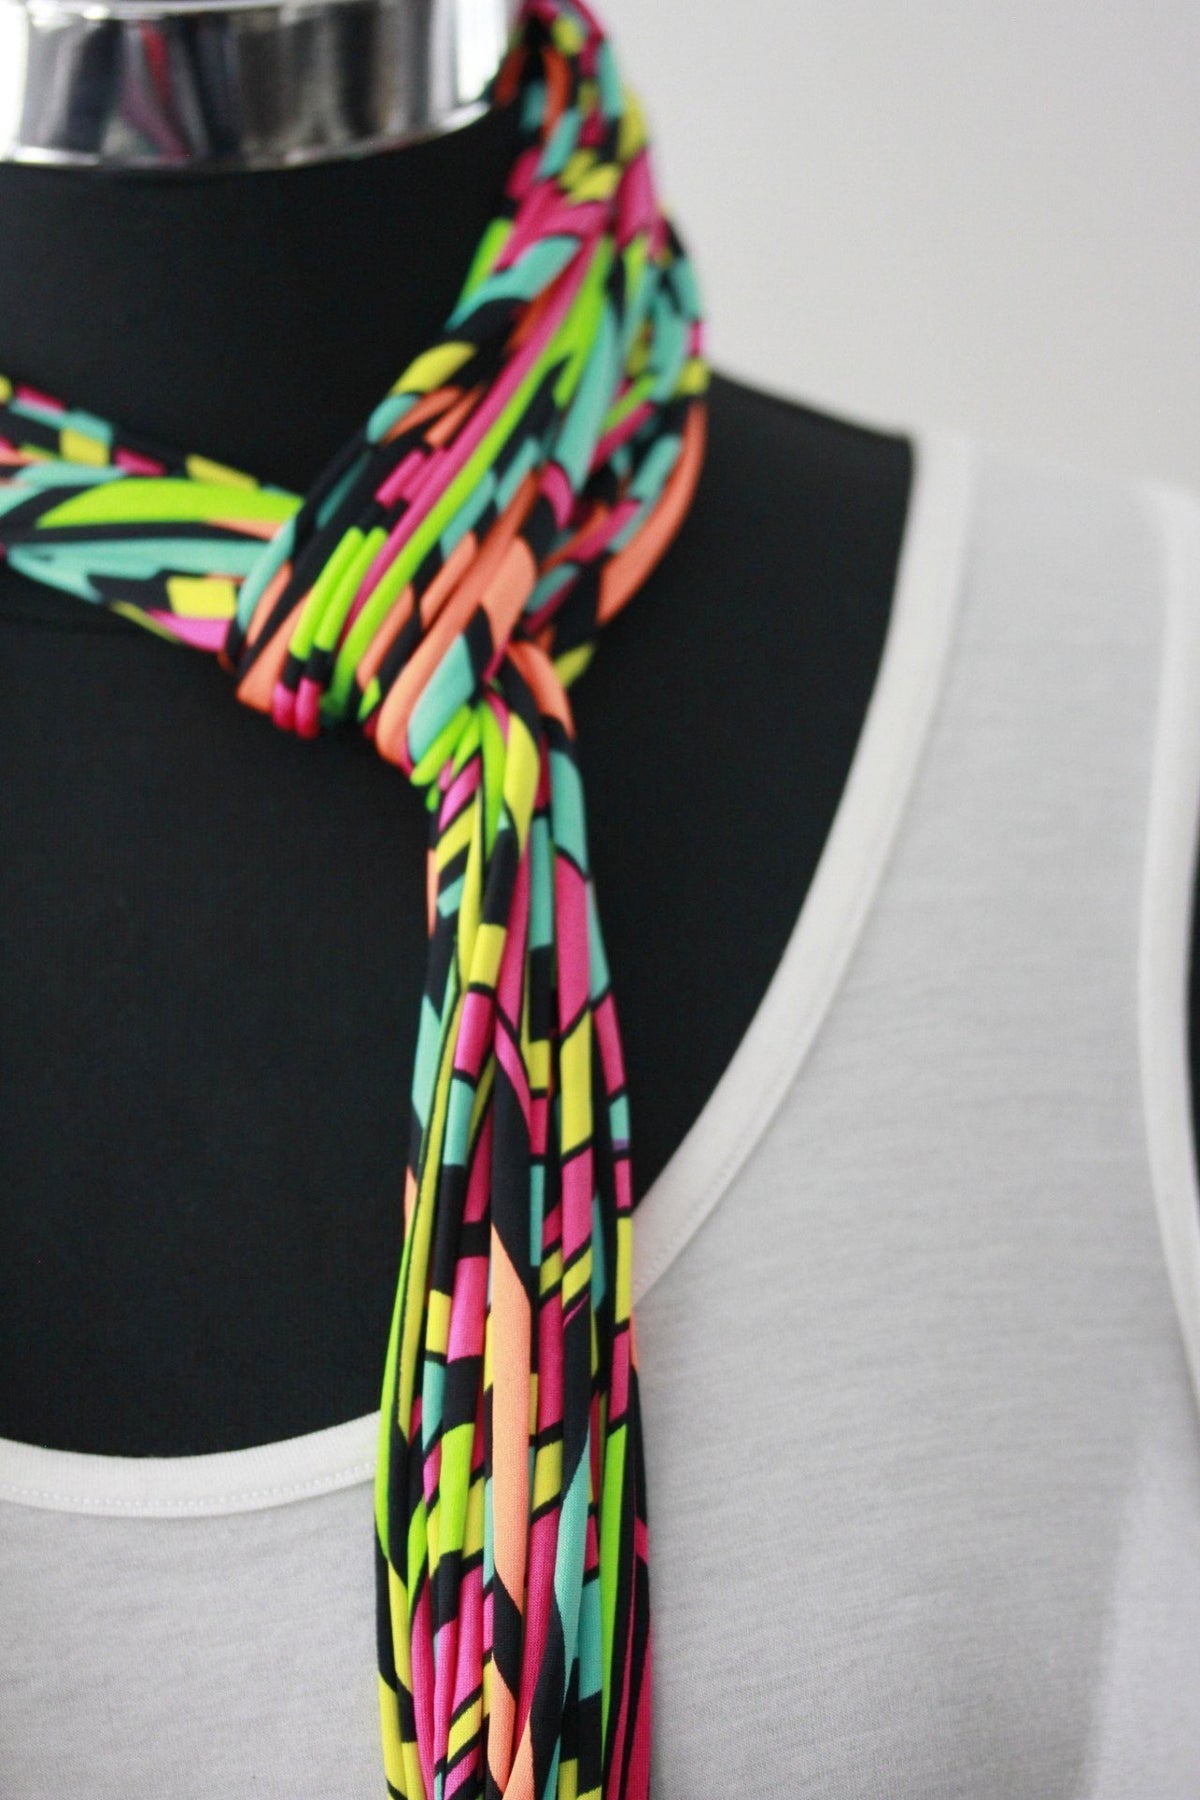 Handmade Neon Infinity Scarf Necklace, Circle , Not a tshirt Scarf for Women or Teens